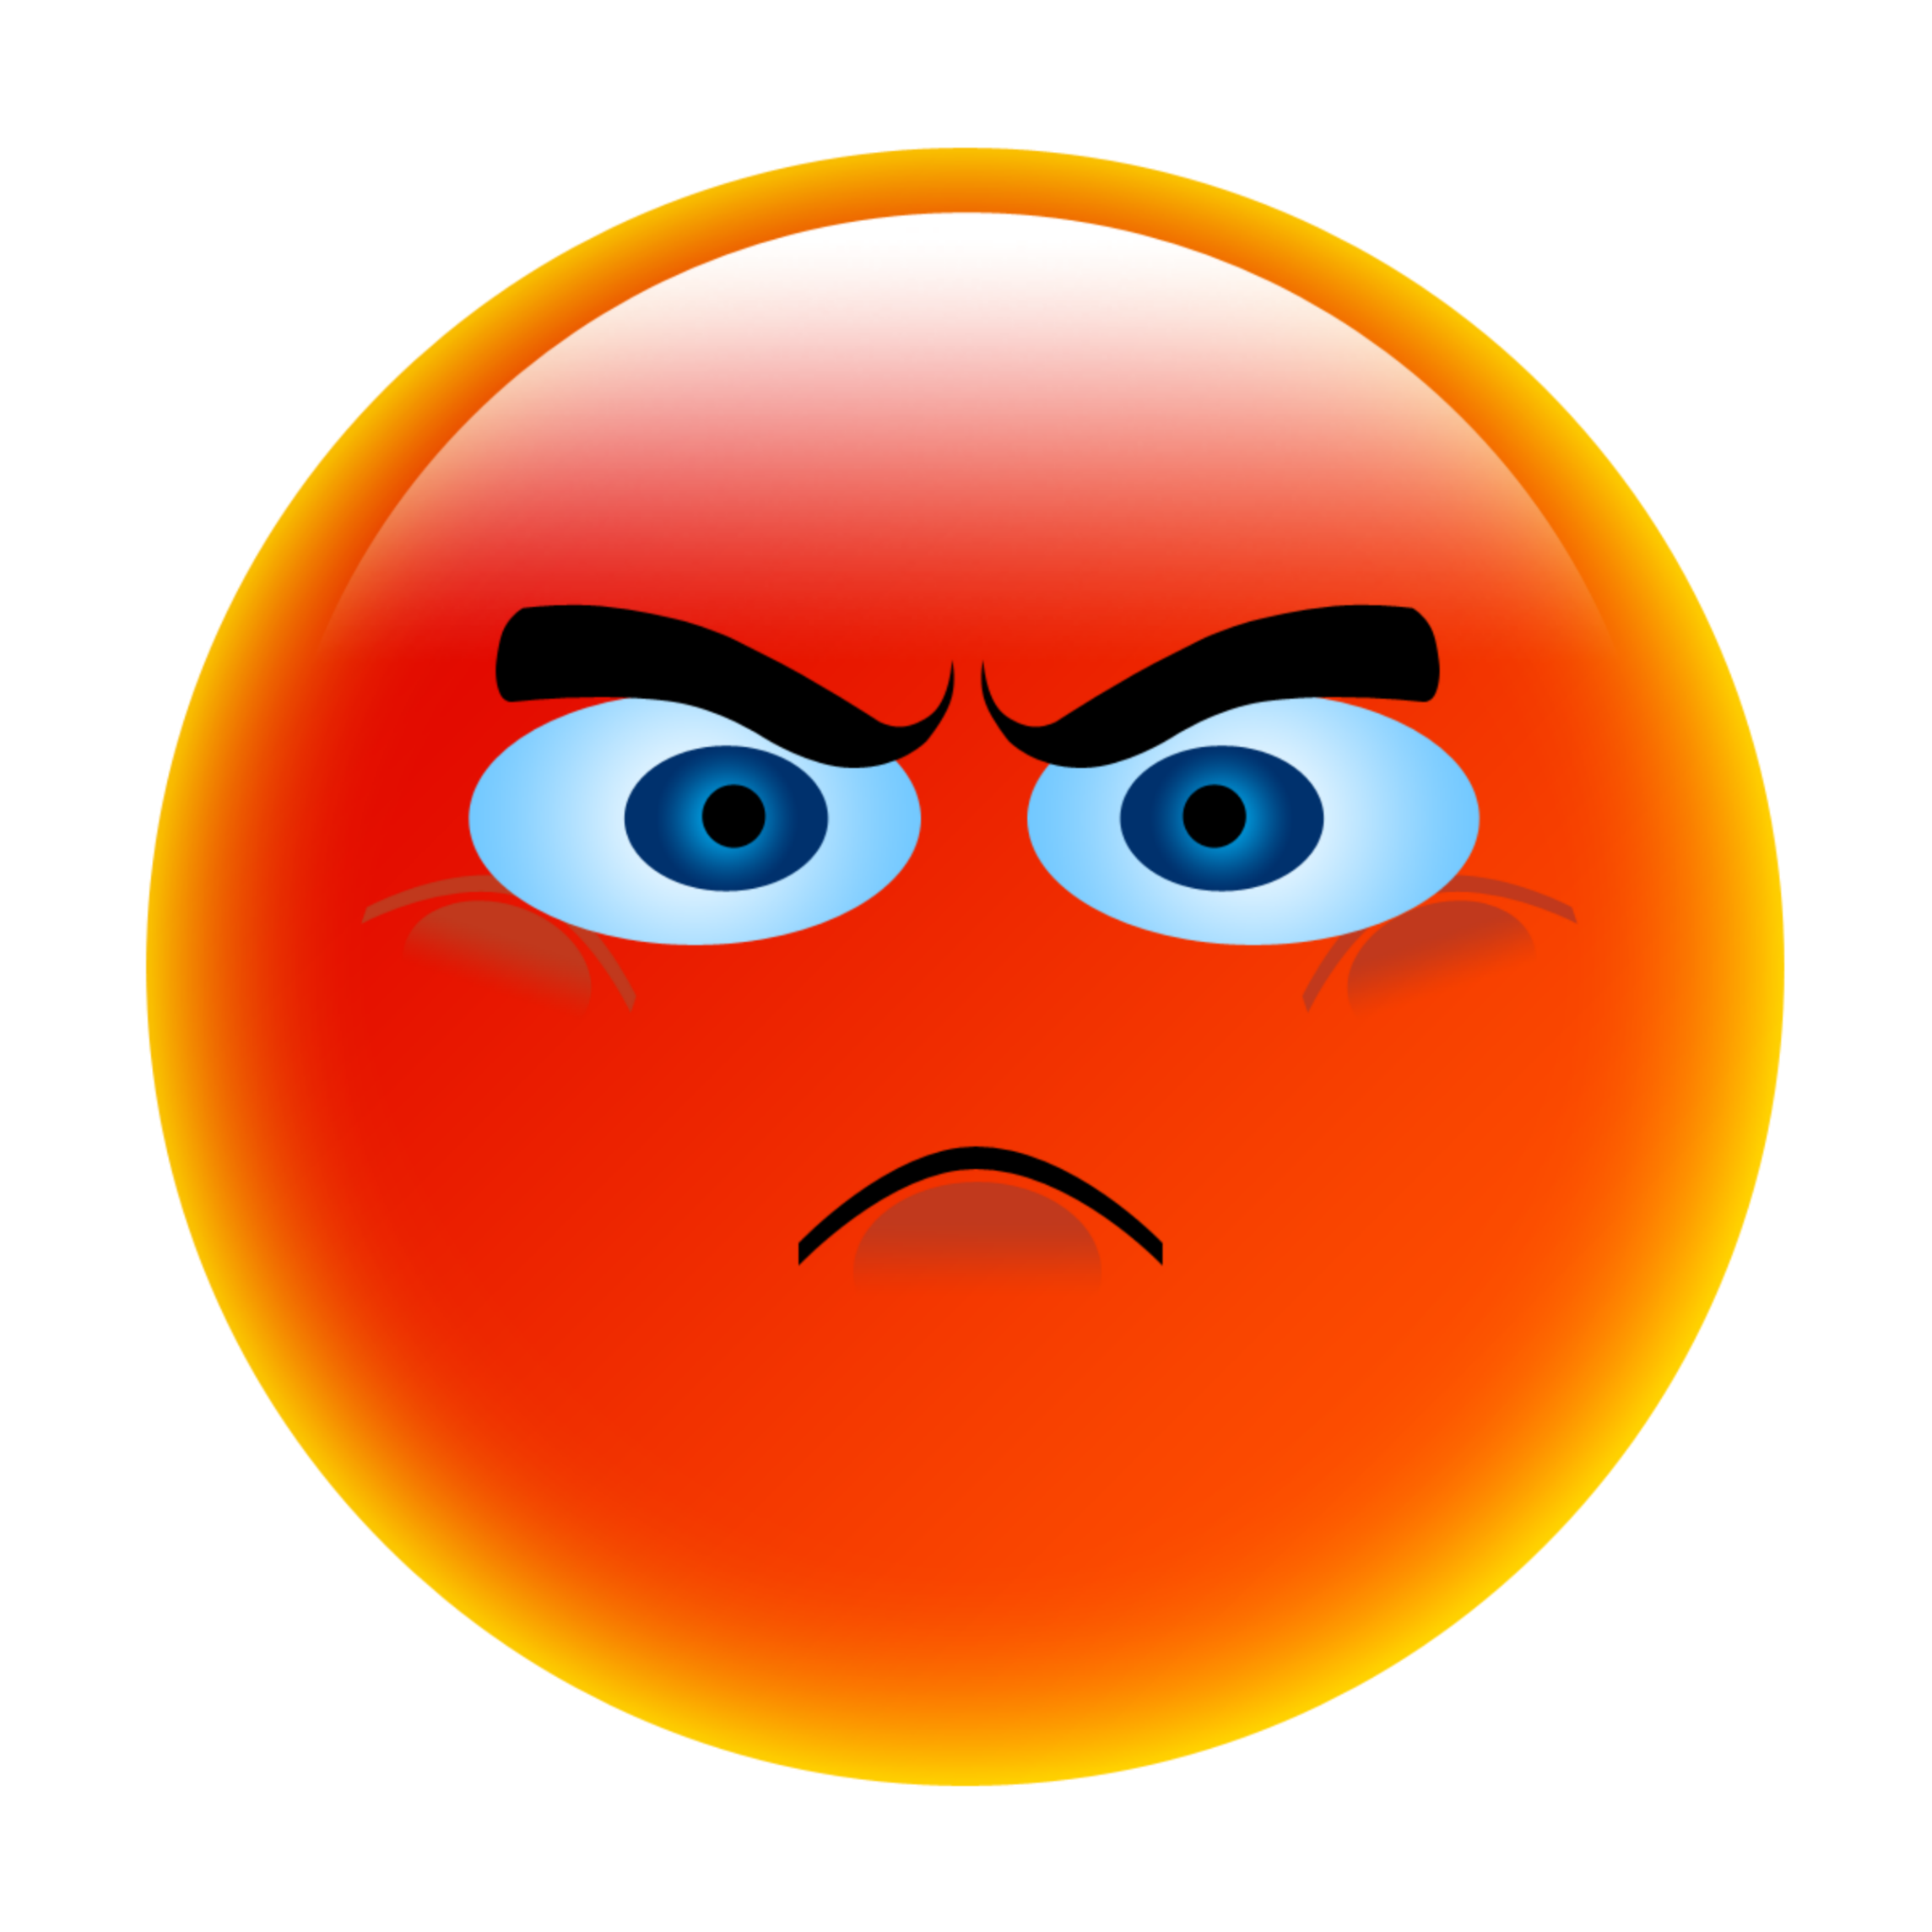 Anger Smiley Emoticon Face Clip Art Png 1024x1024px Anger Emoji CLOUD